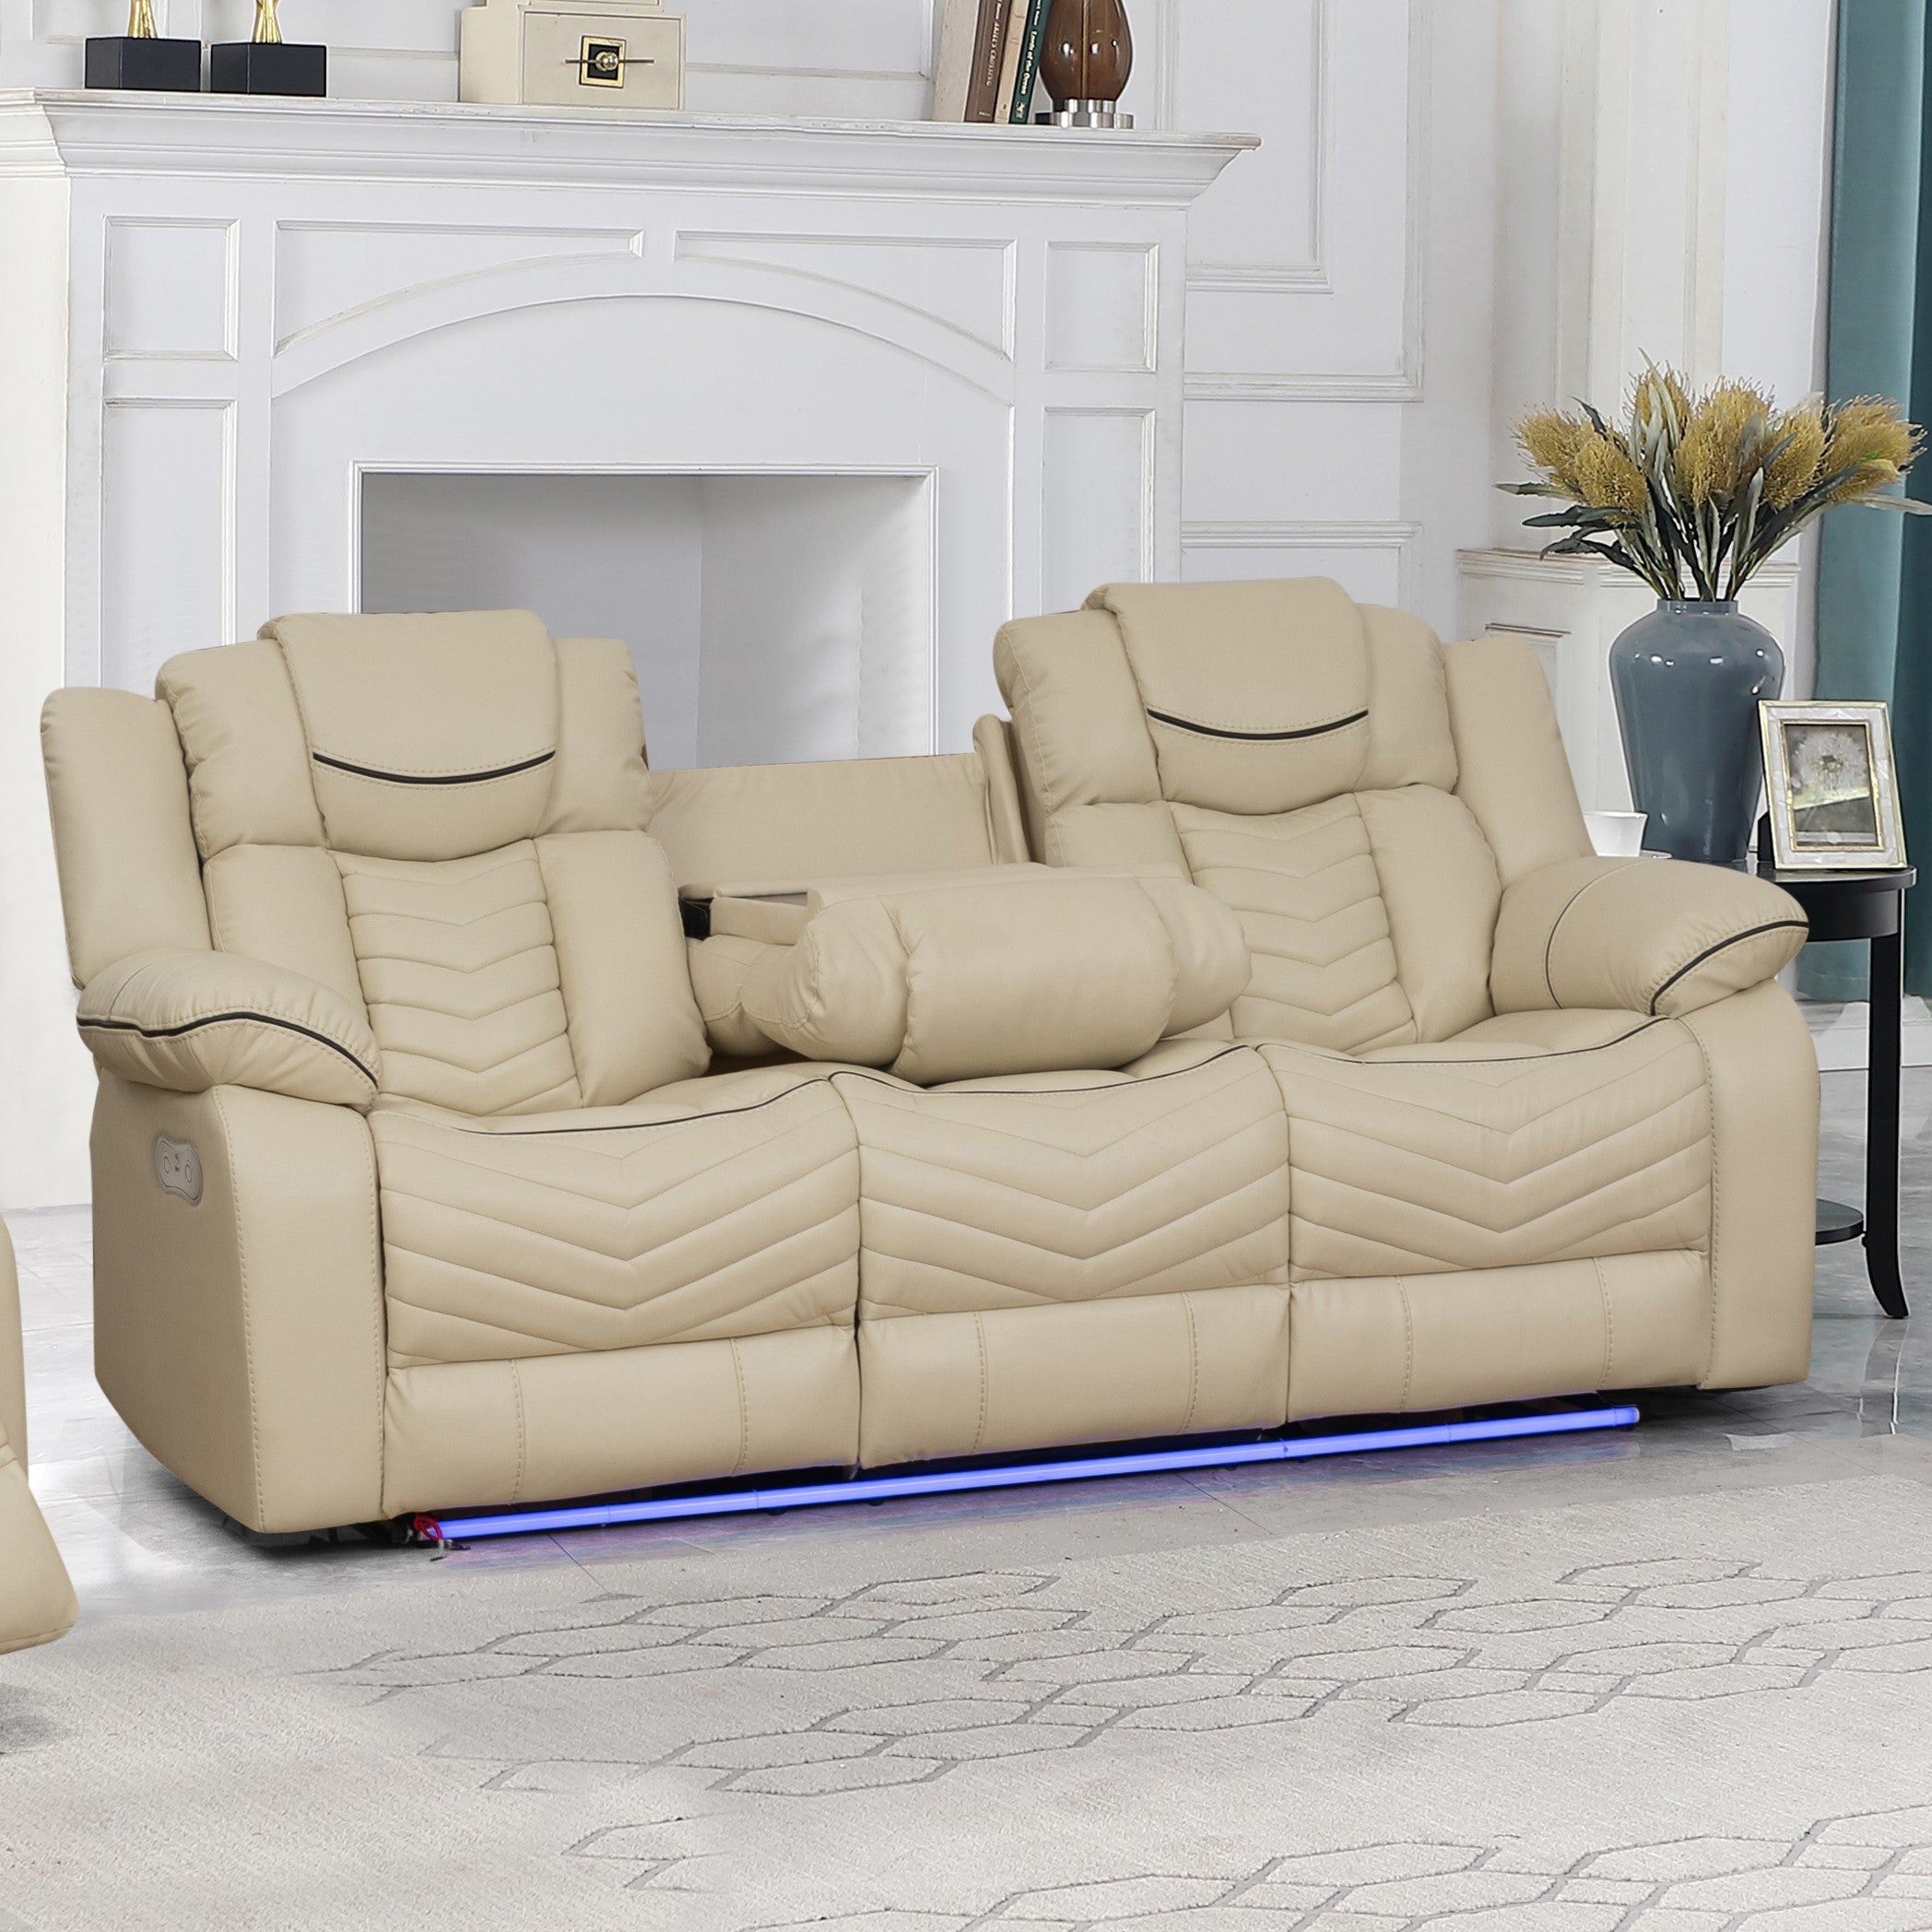 Roger Power Recliner sofa Collection Beige Air Leather